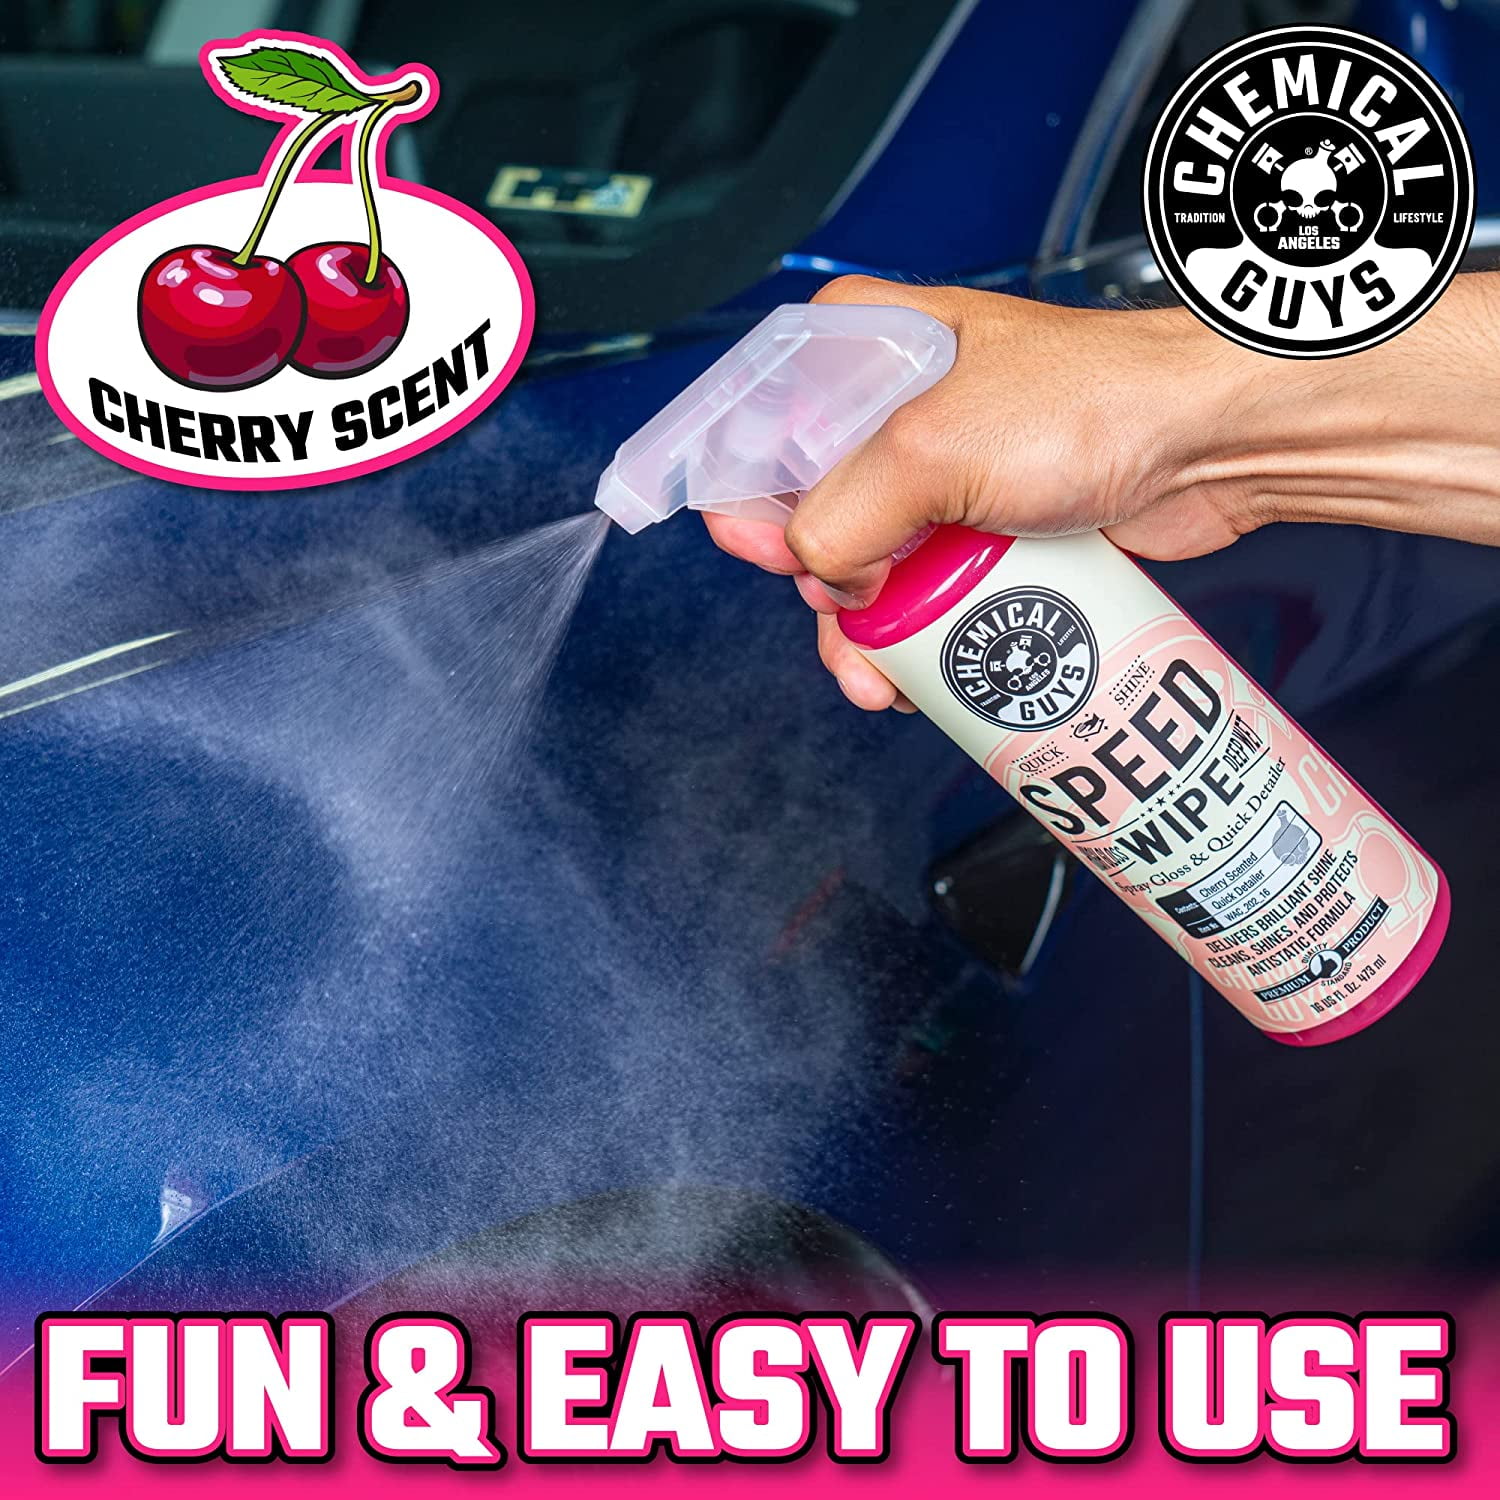 Speed Wipe Quick Detailer - Chemical Guys Car Care 